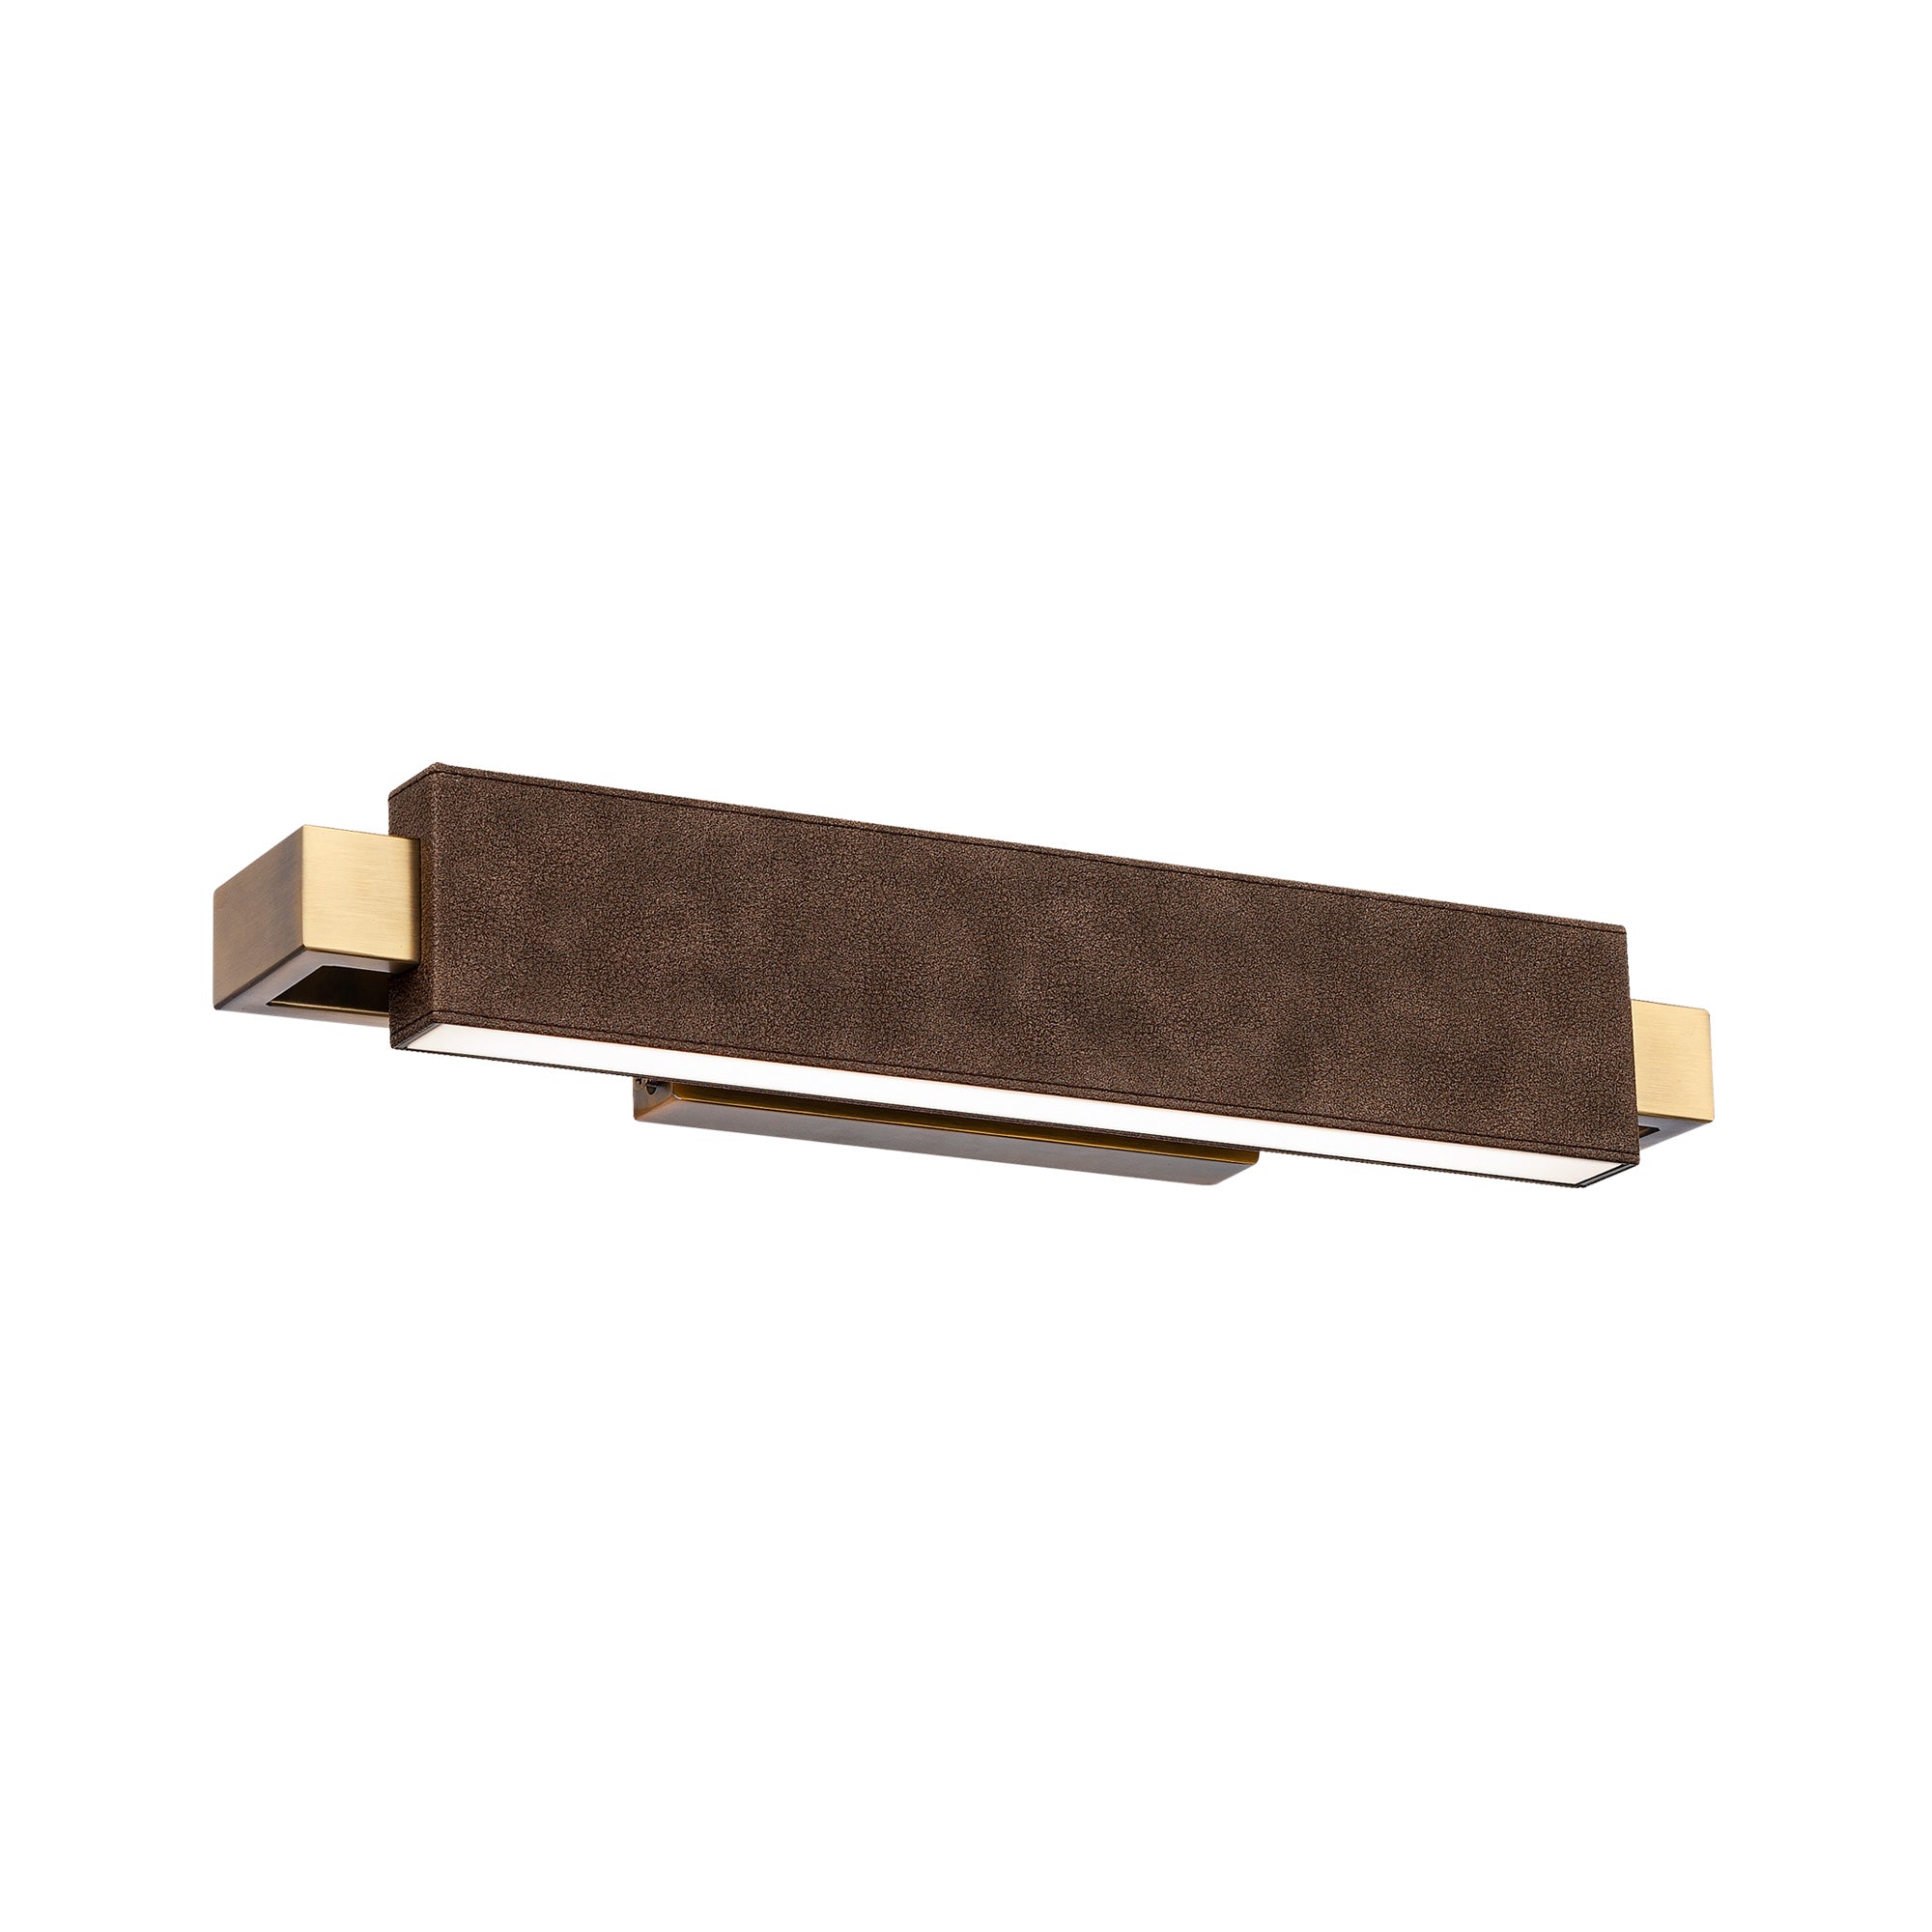 KINSMAN Bathroom sconce Brown, Gold INTEGRATED LED - WS-28119-BW/AB | MODERN FORMS